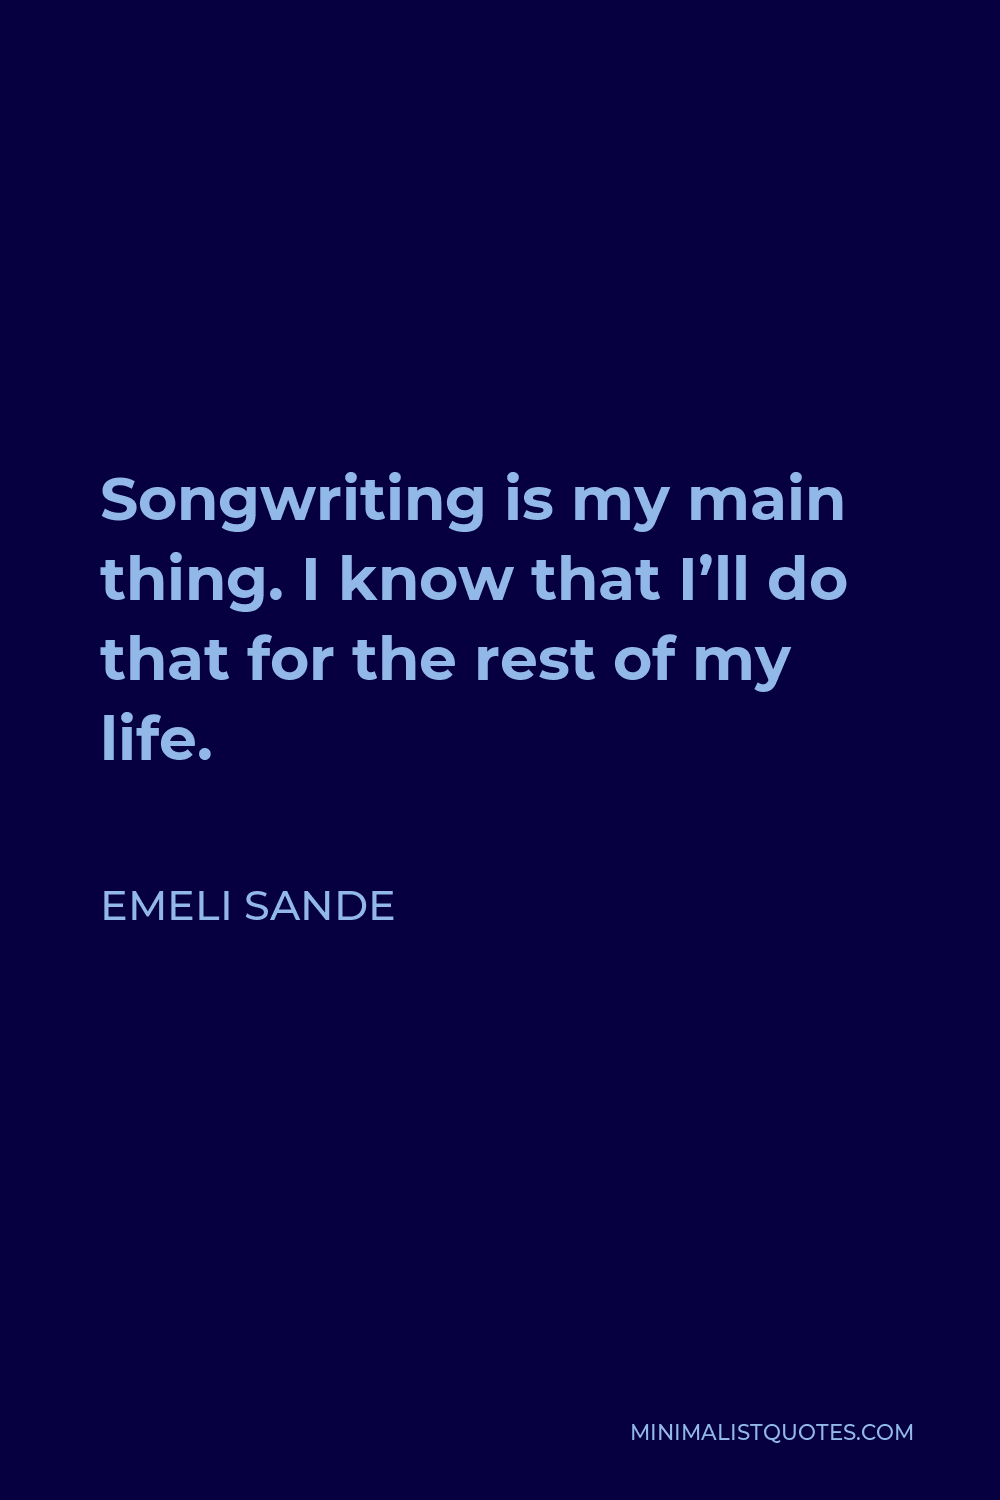 Emeli Sande Quote - Songwriting is my main thing. I know that I’ll do that for the rest of my life.